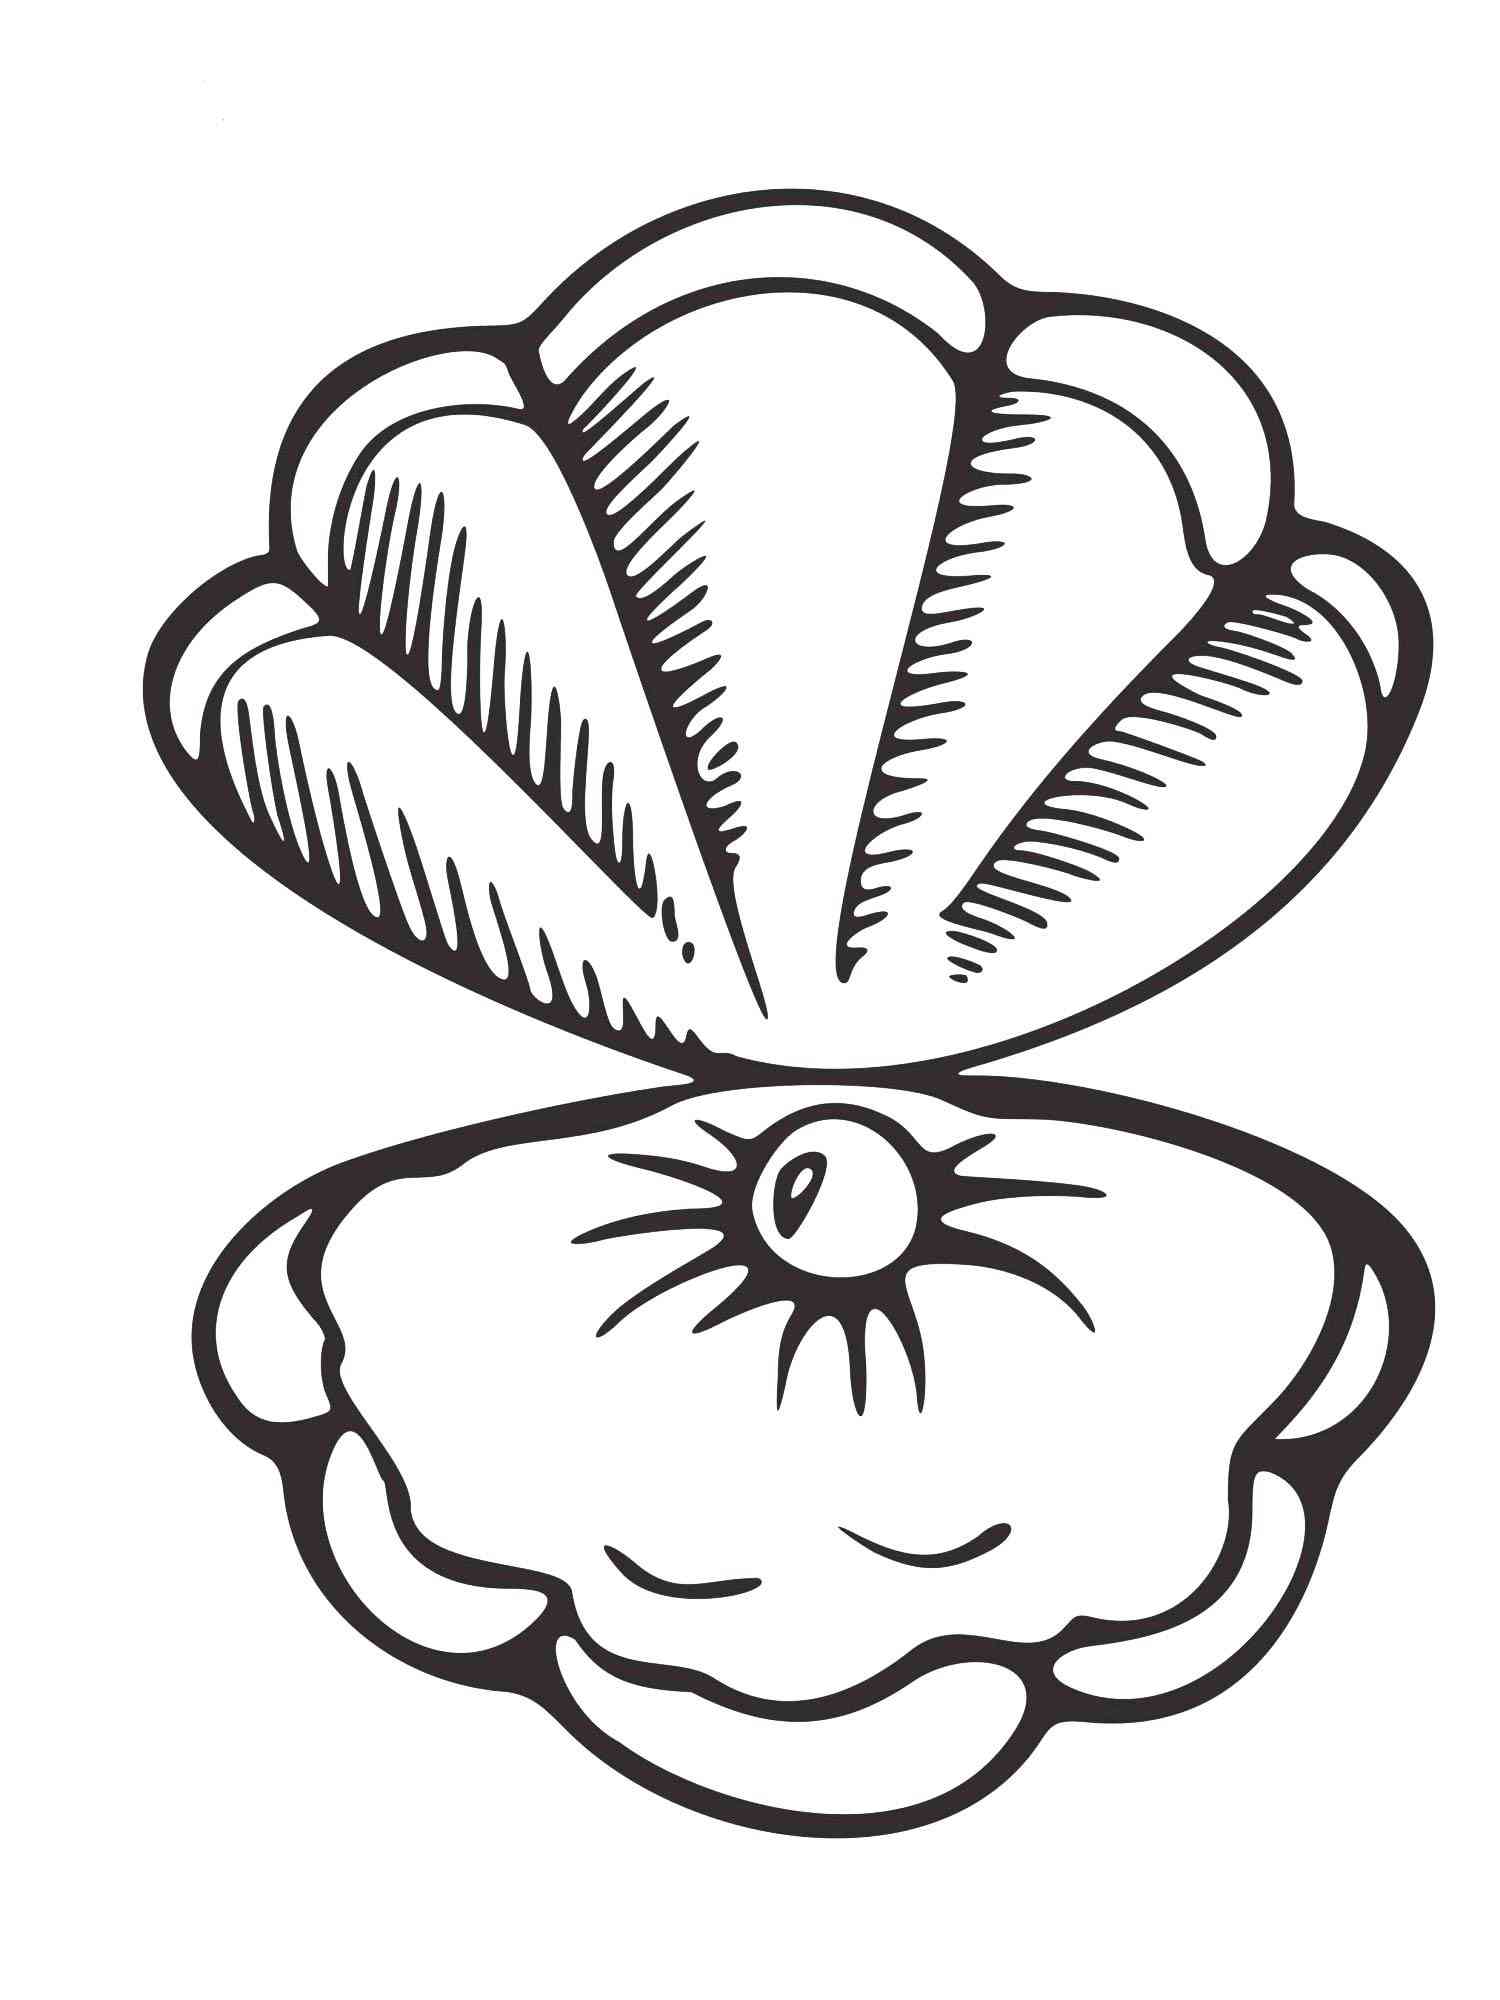 Clam 8 coloring page